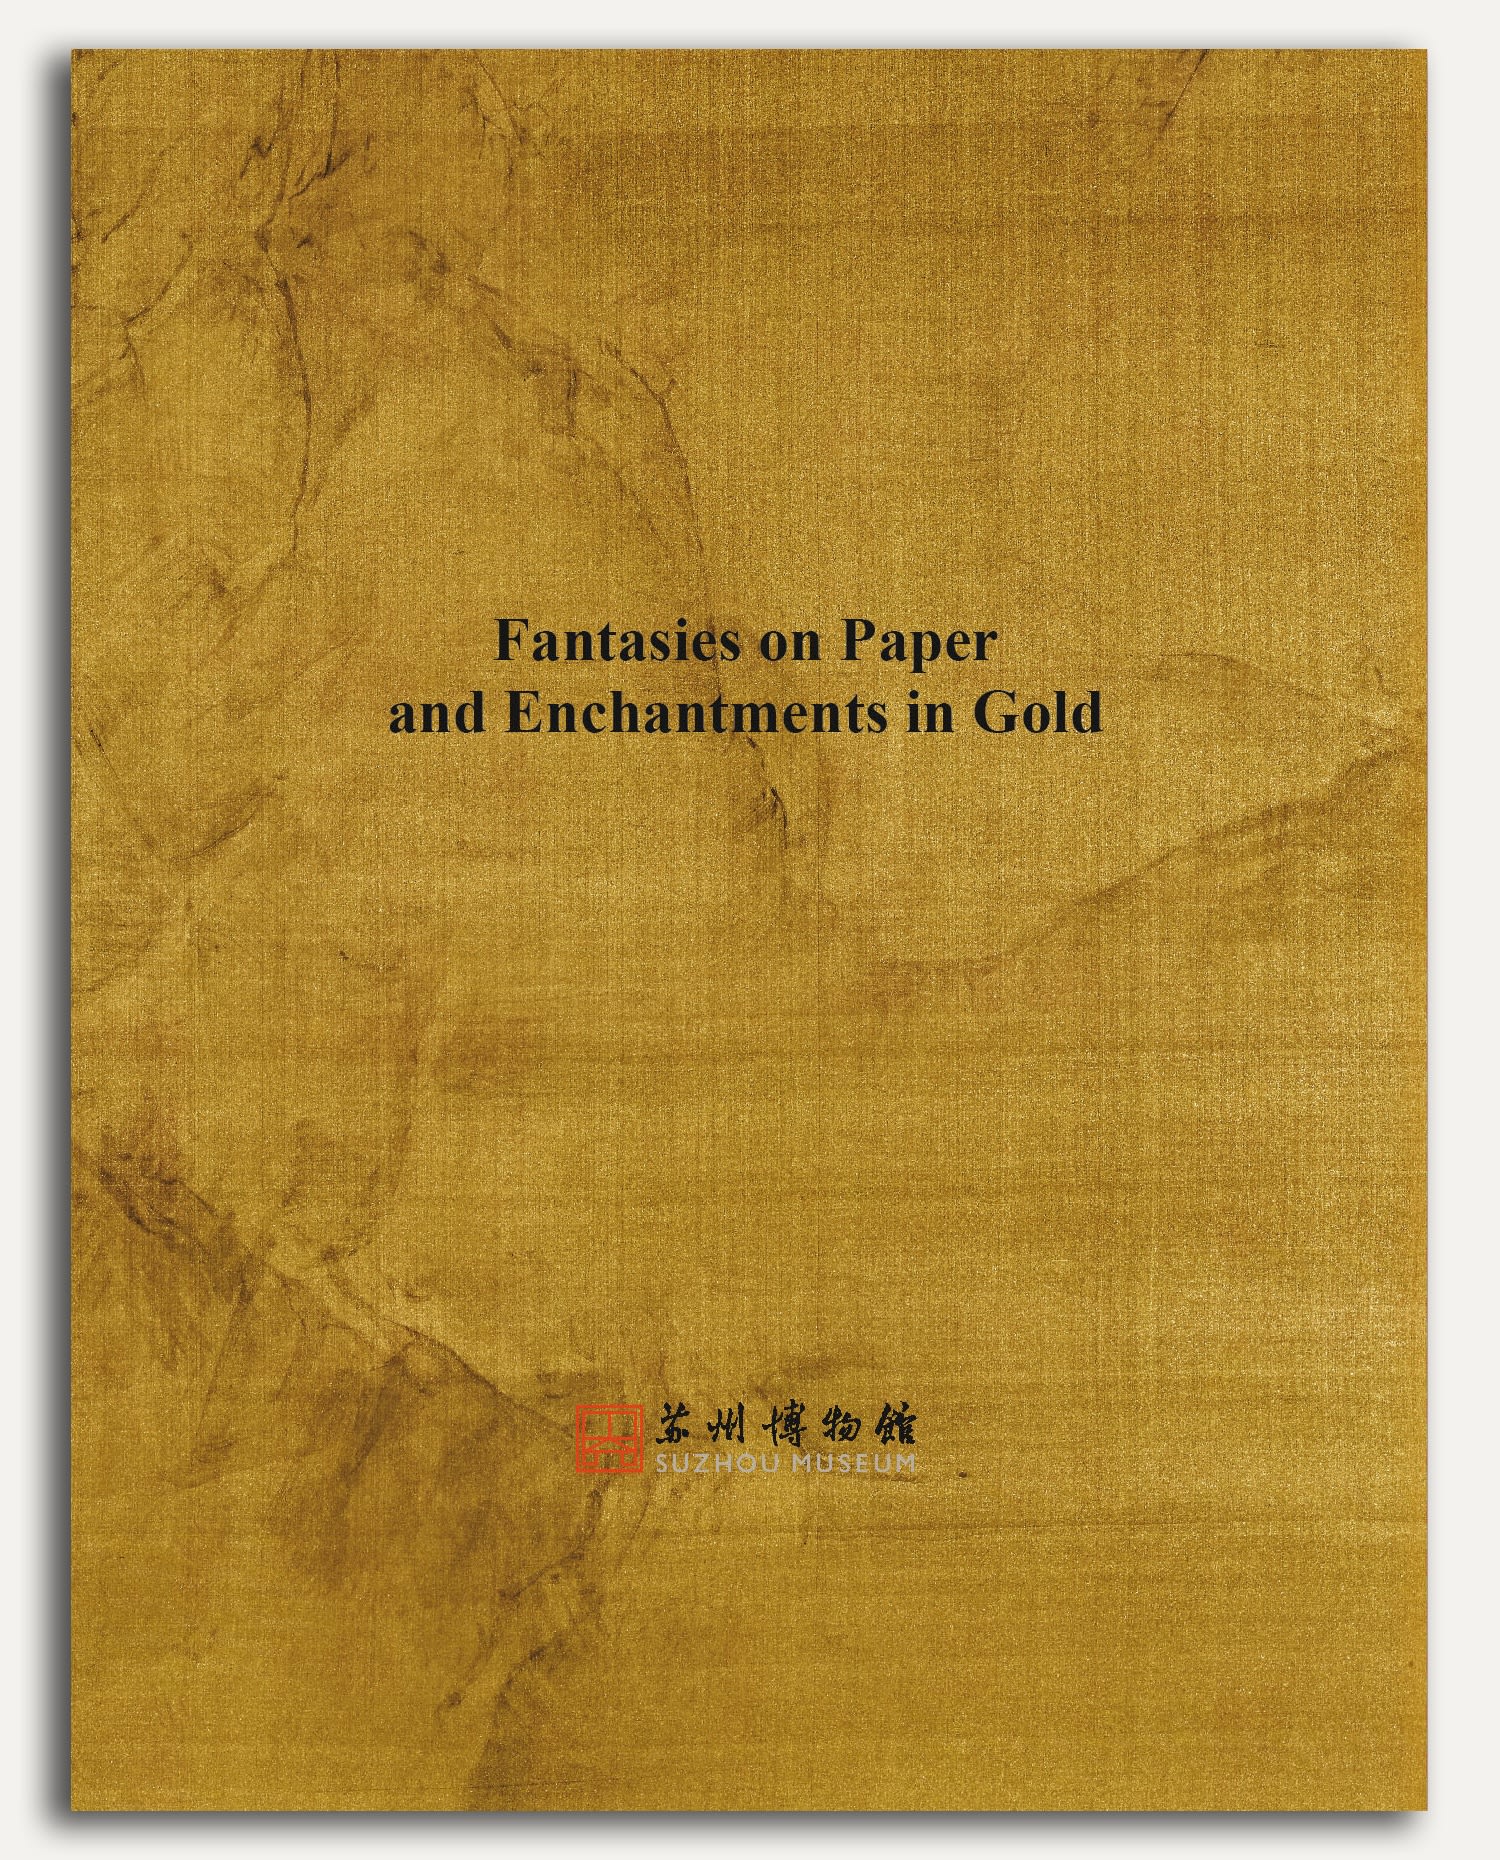 Fantasies on Paper and Enchantments in Gold